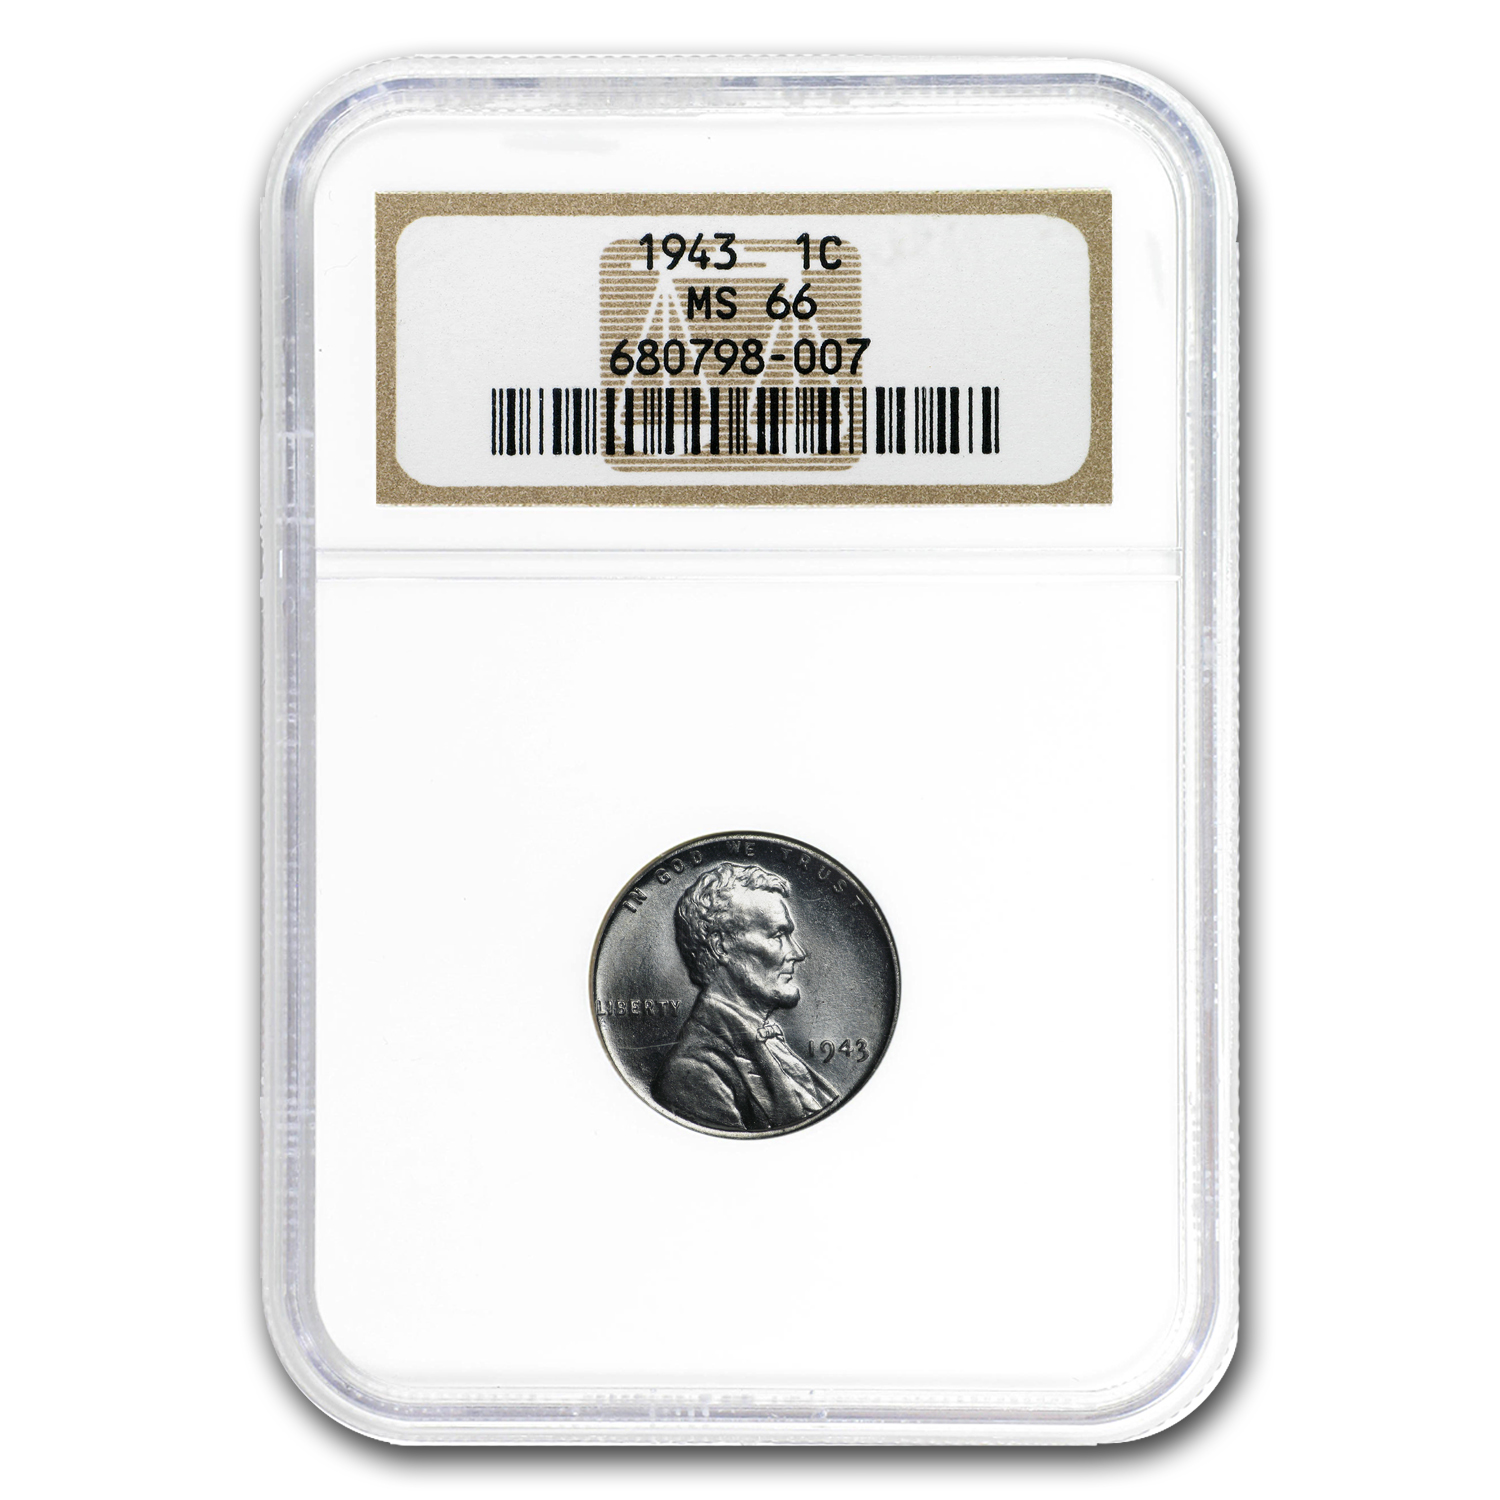 Buy 1943 Lincoln Cent MS-66 NGC